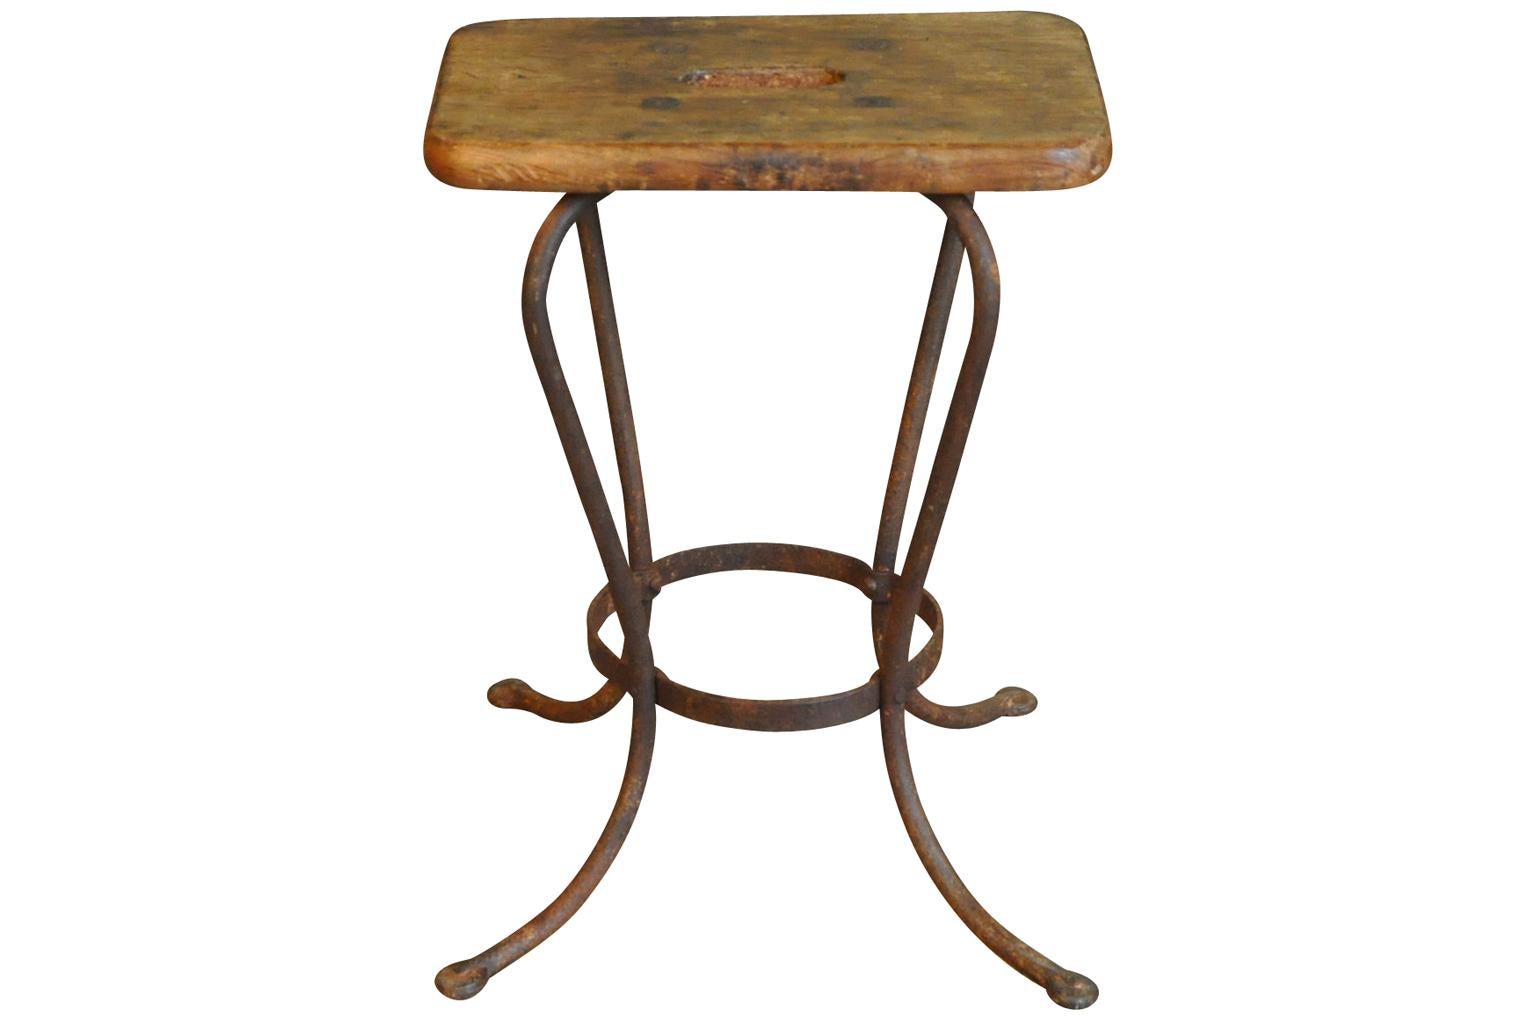 A delightful work stool from the South of France. Soundly constructed from wood and iron with an ergonomic seat.